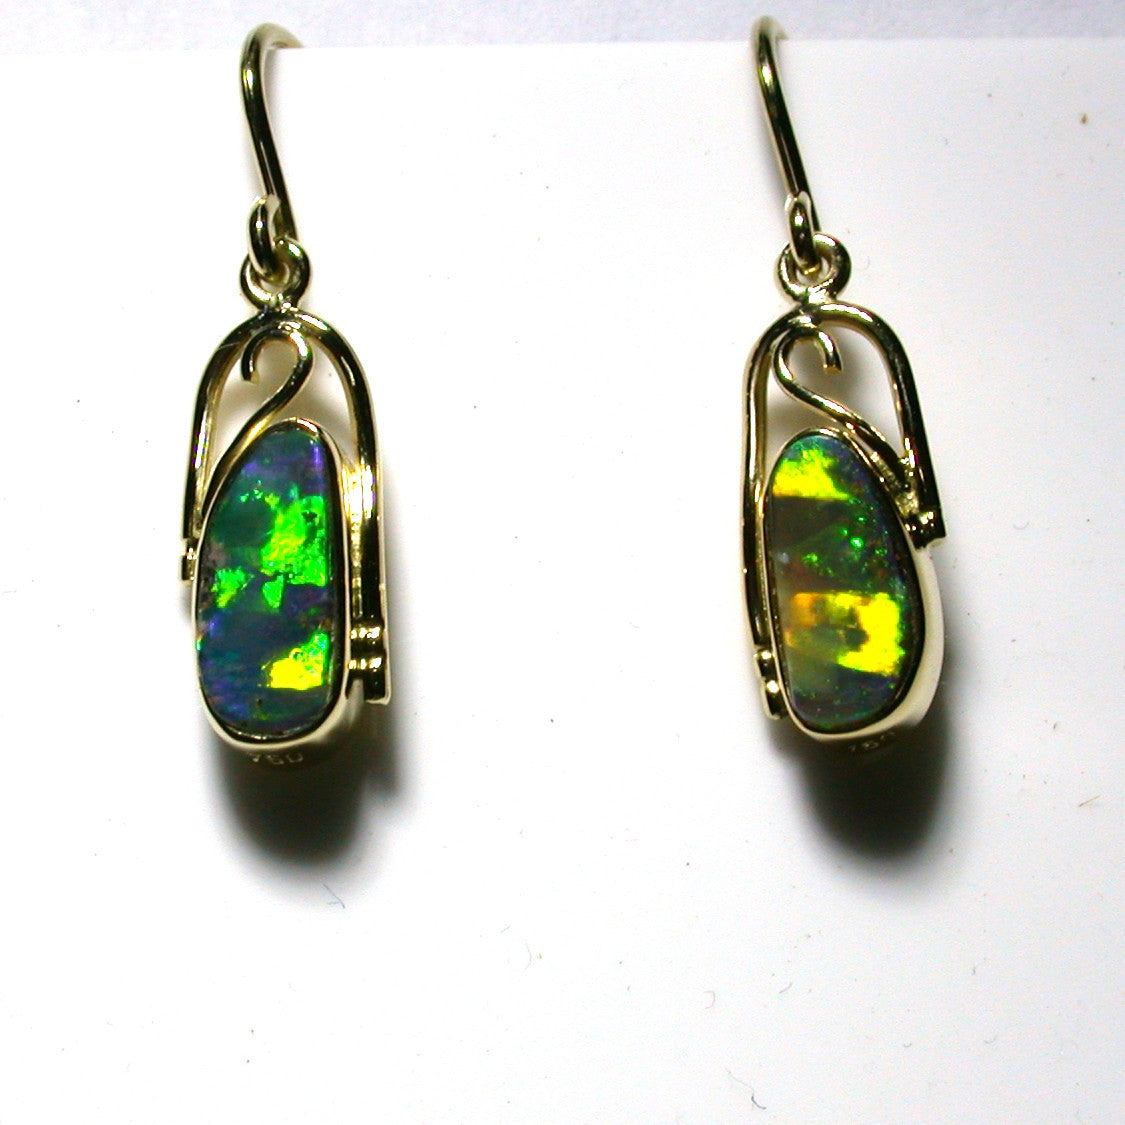 Orange, Gold and Green solid boulder opal drop earrings